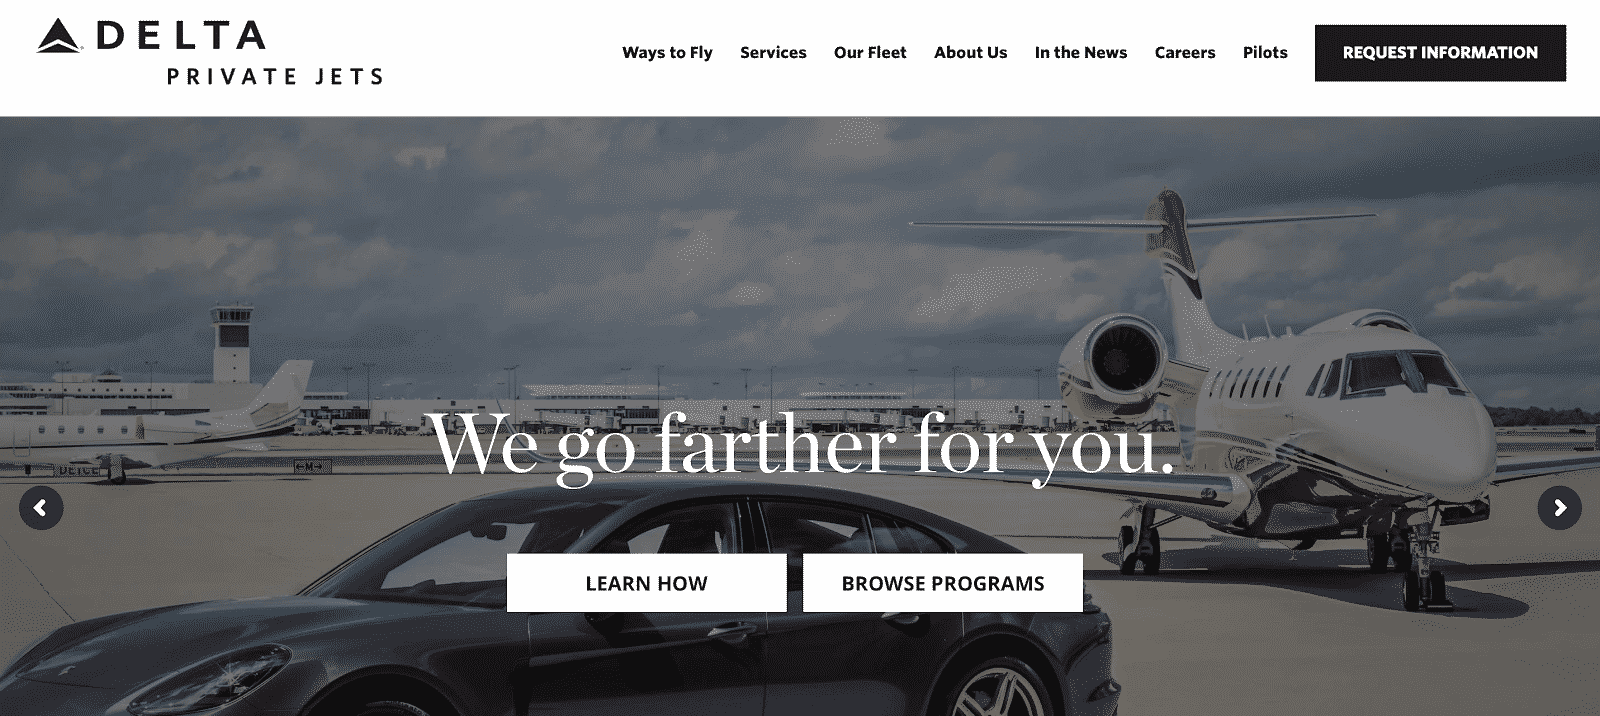 The Delta Private Jets homepage